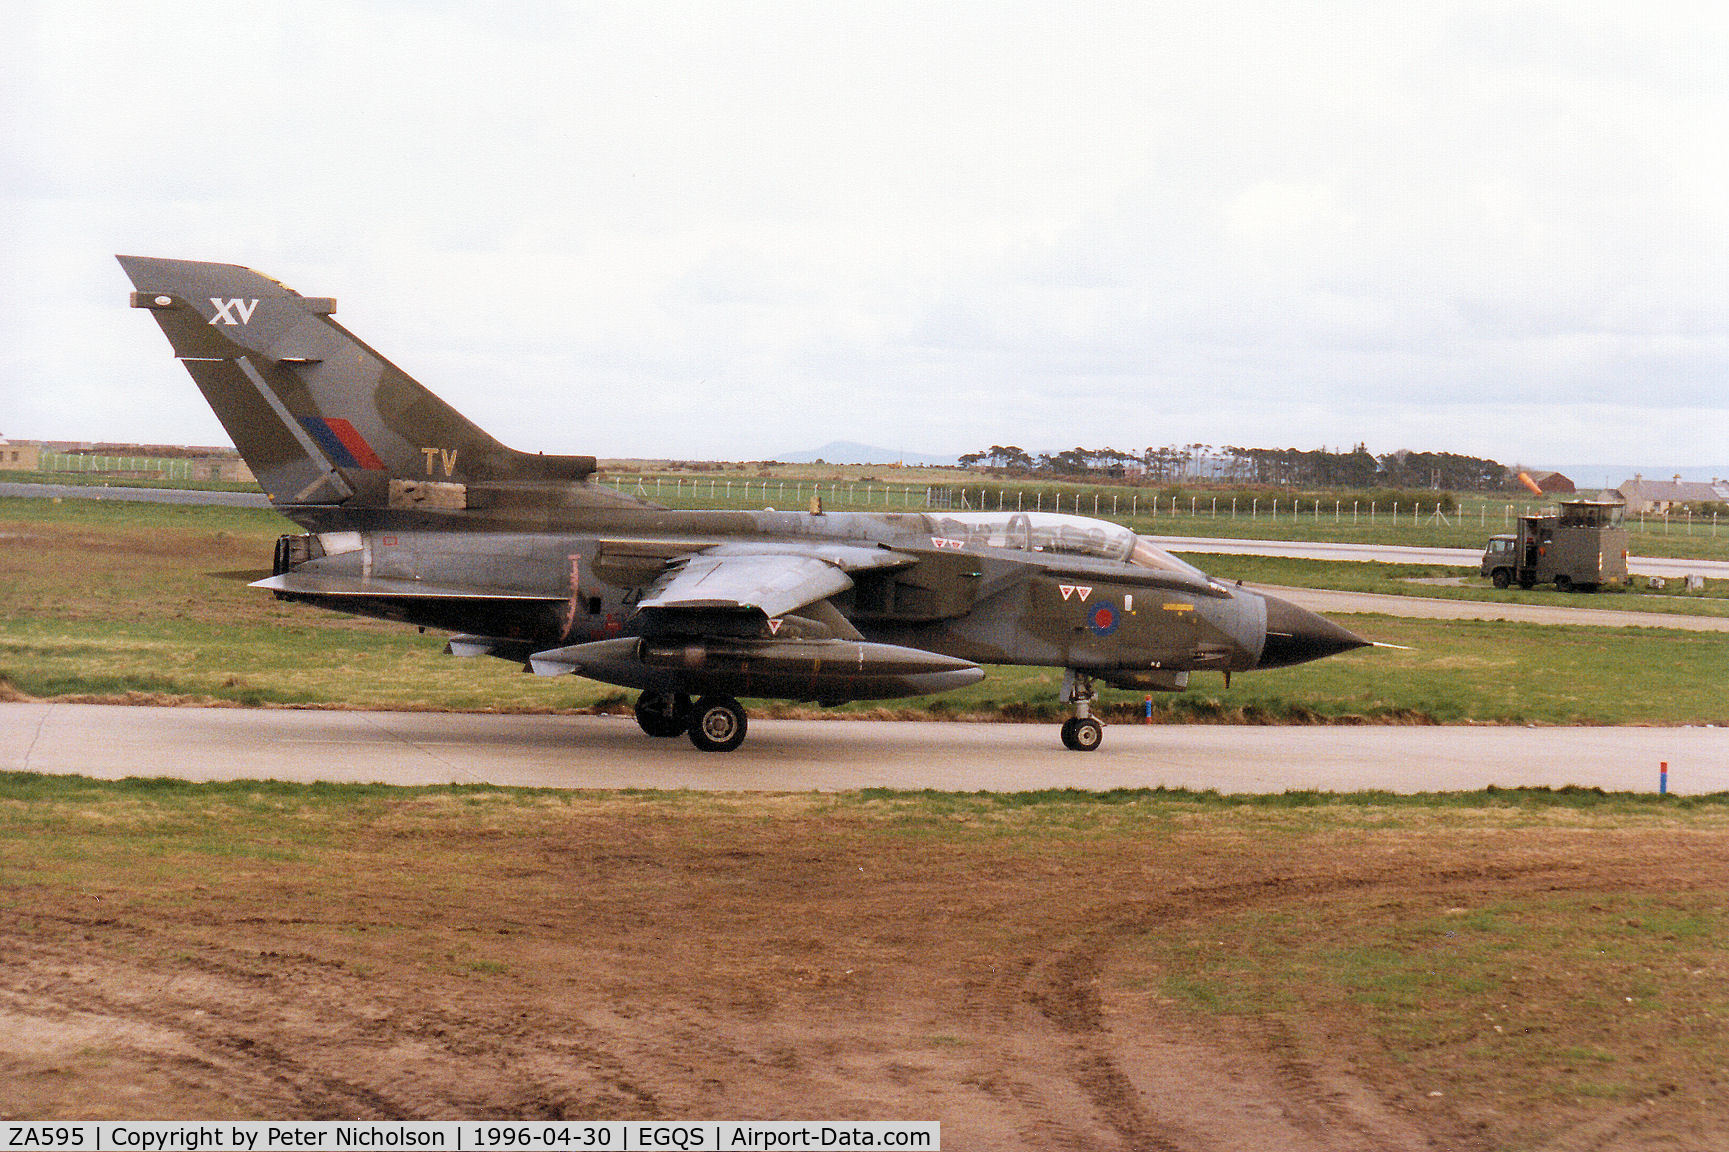 ZA595, 1982 Panavia Tornado GR.1 C/N 112/BT023/3059, Tornado GR.1 of 15[Reserve] Squadron taxying to Runway 05 at RAF Lossiemouth in April 1996.